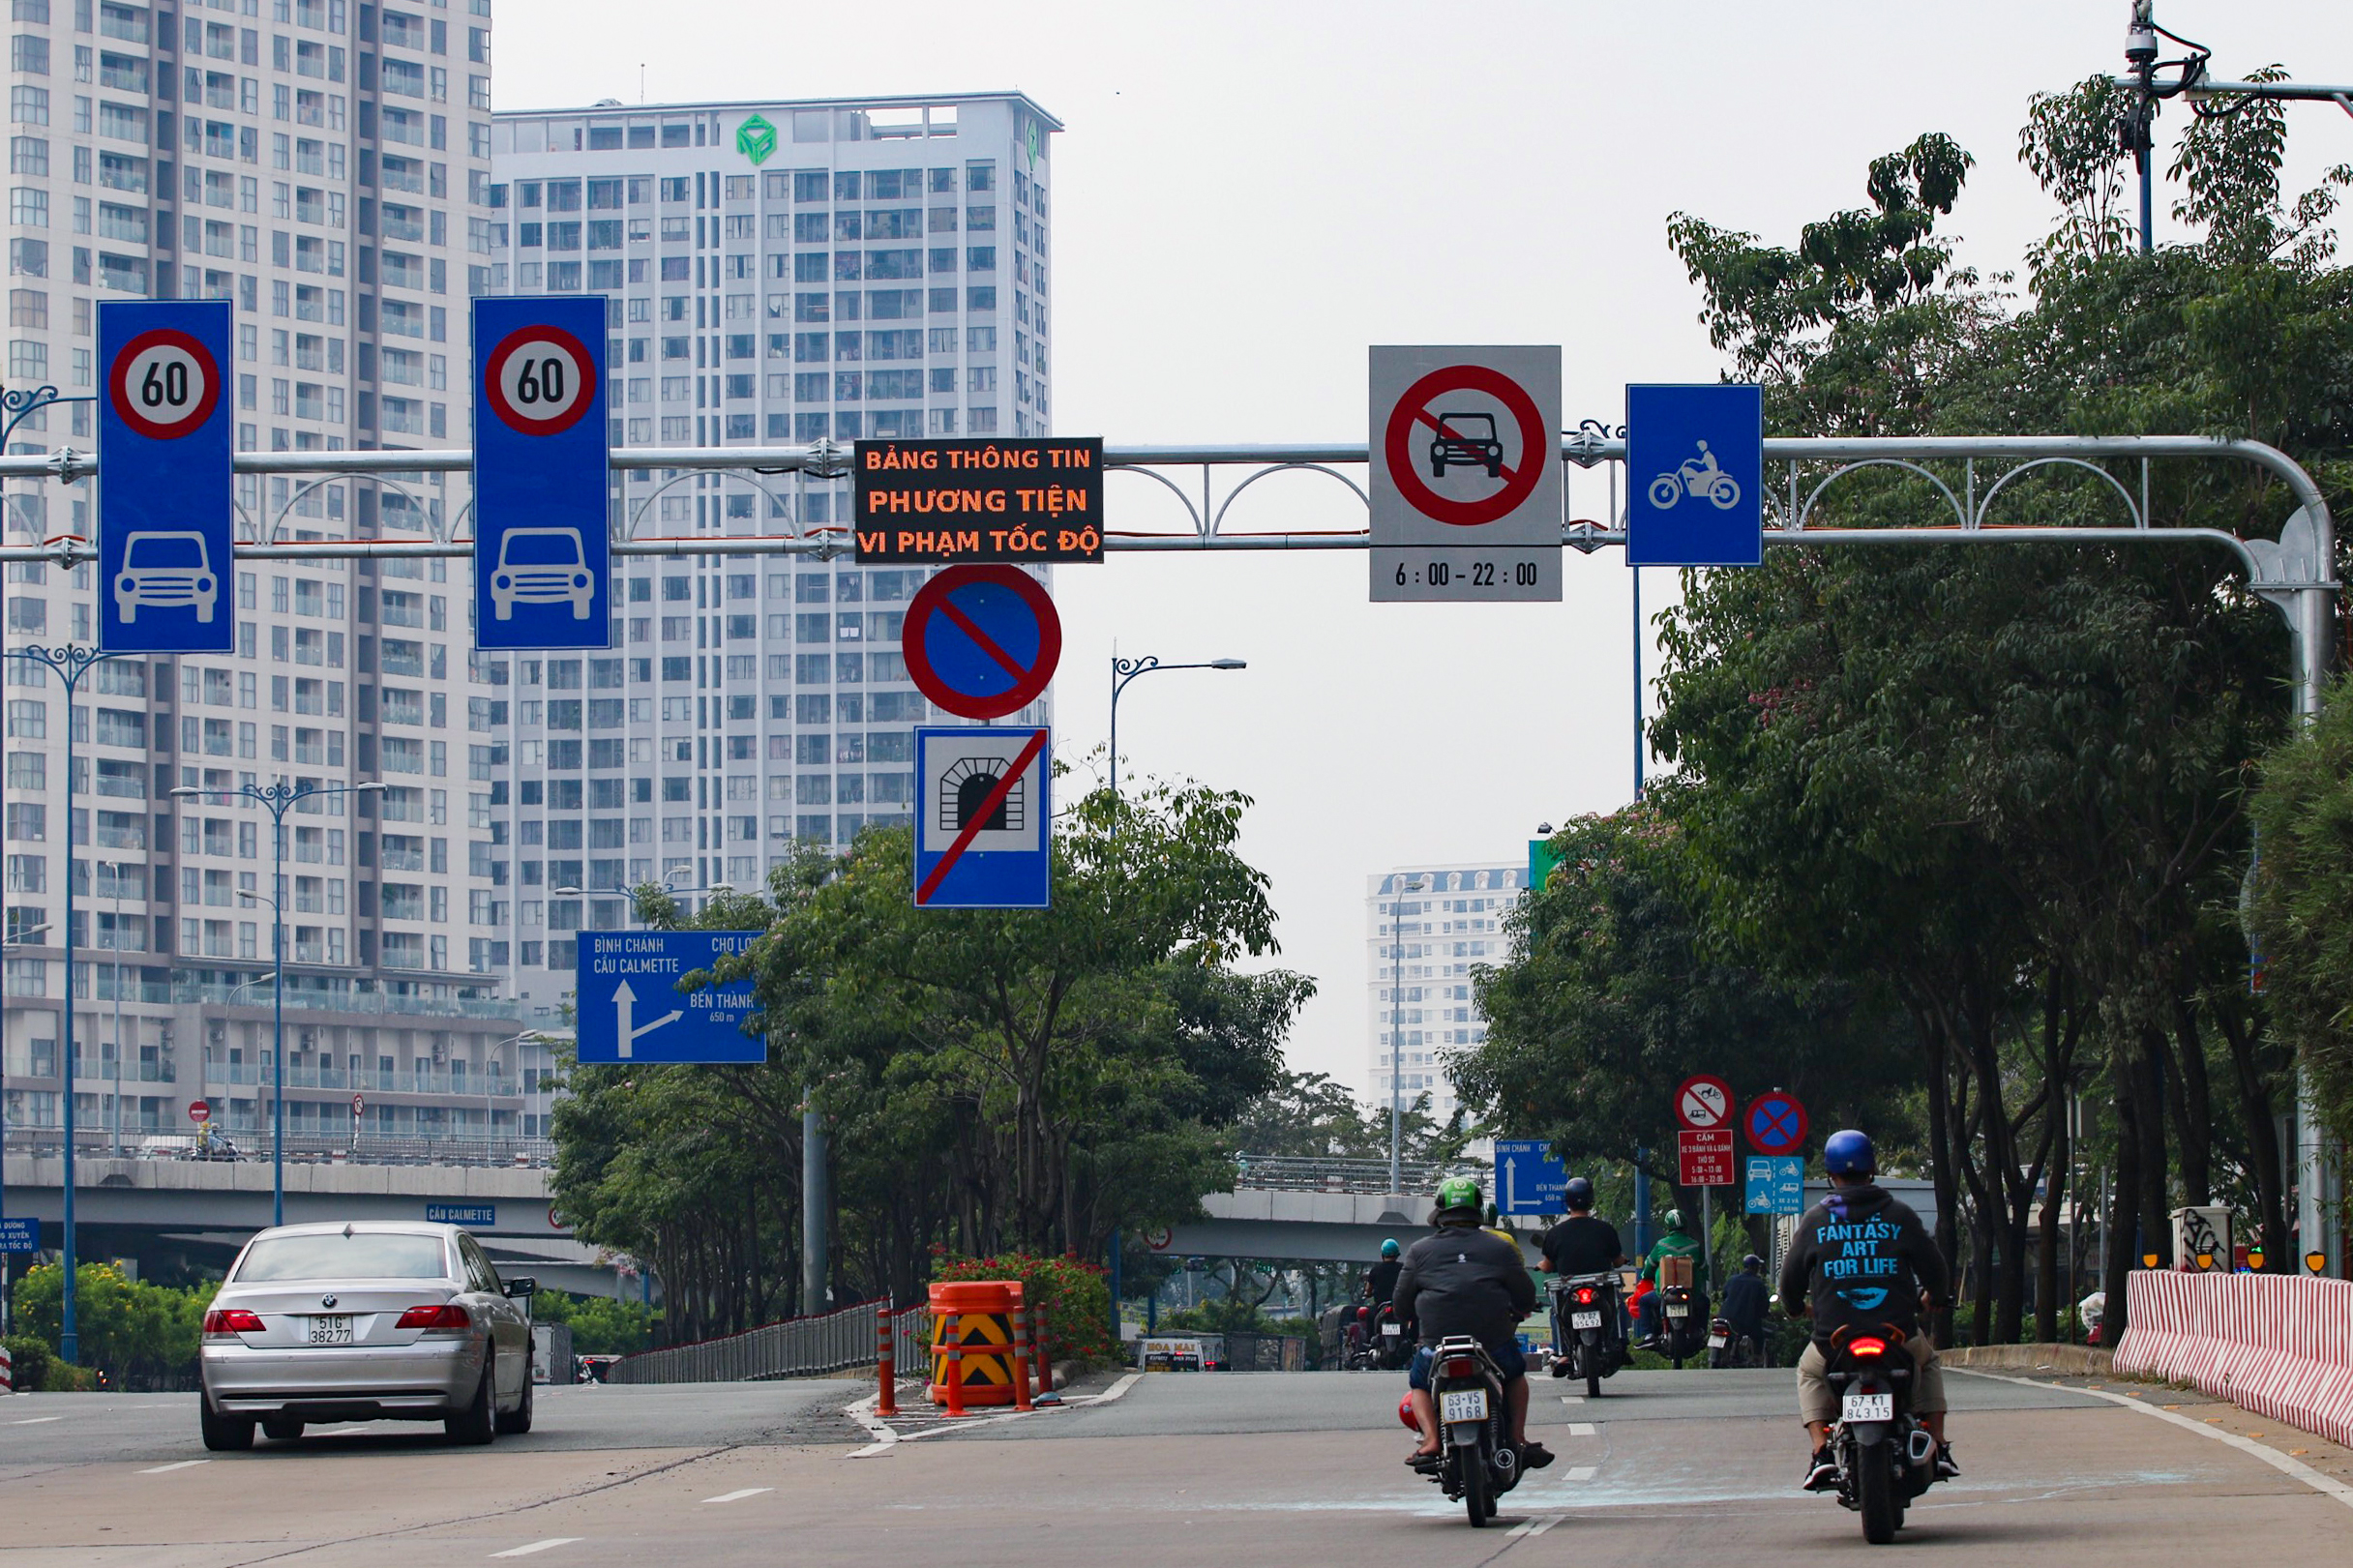 A newly-installed radar speed sign is pictured at one end of the Thu Thiem Tunnel in Thu Duc City, Ho Chi Minh City. Photo: Chau Tuan / Tuoi Tre